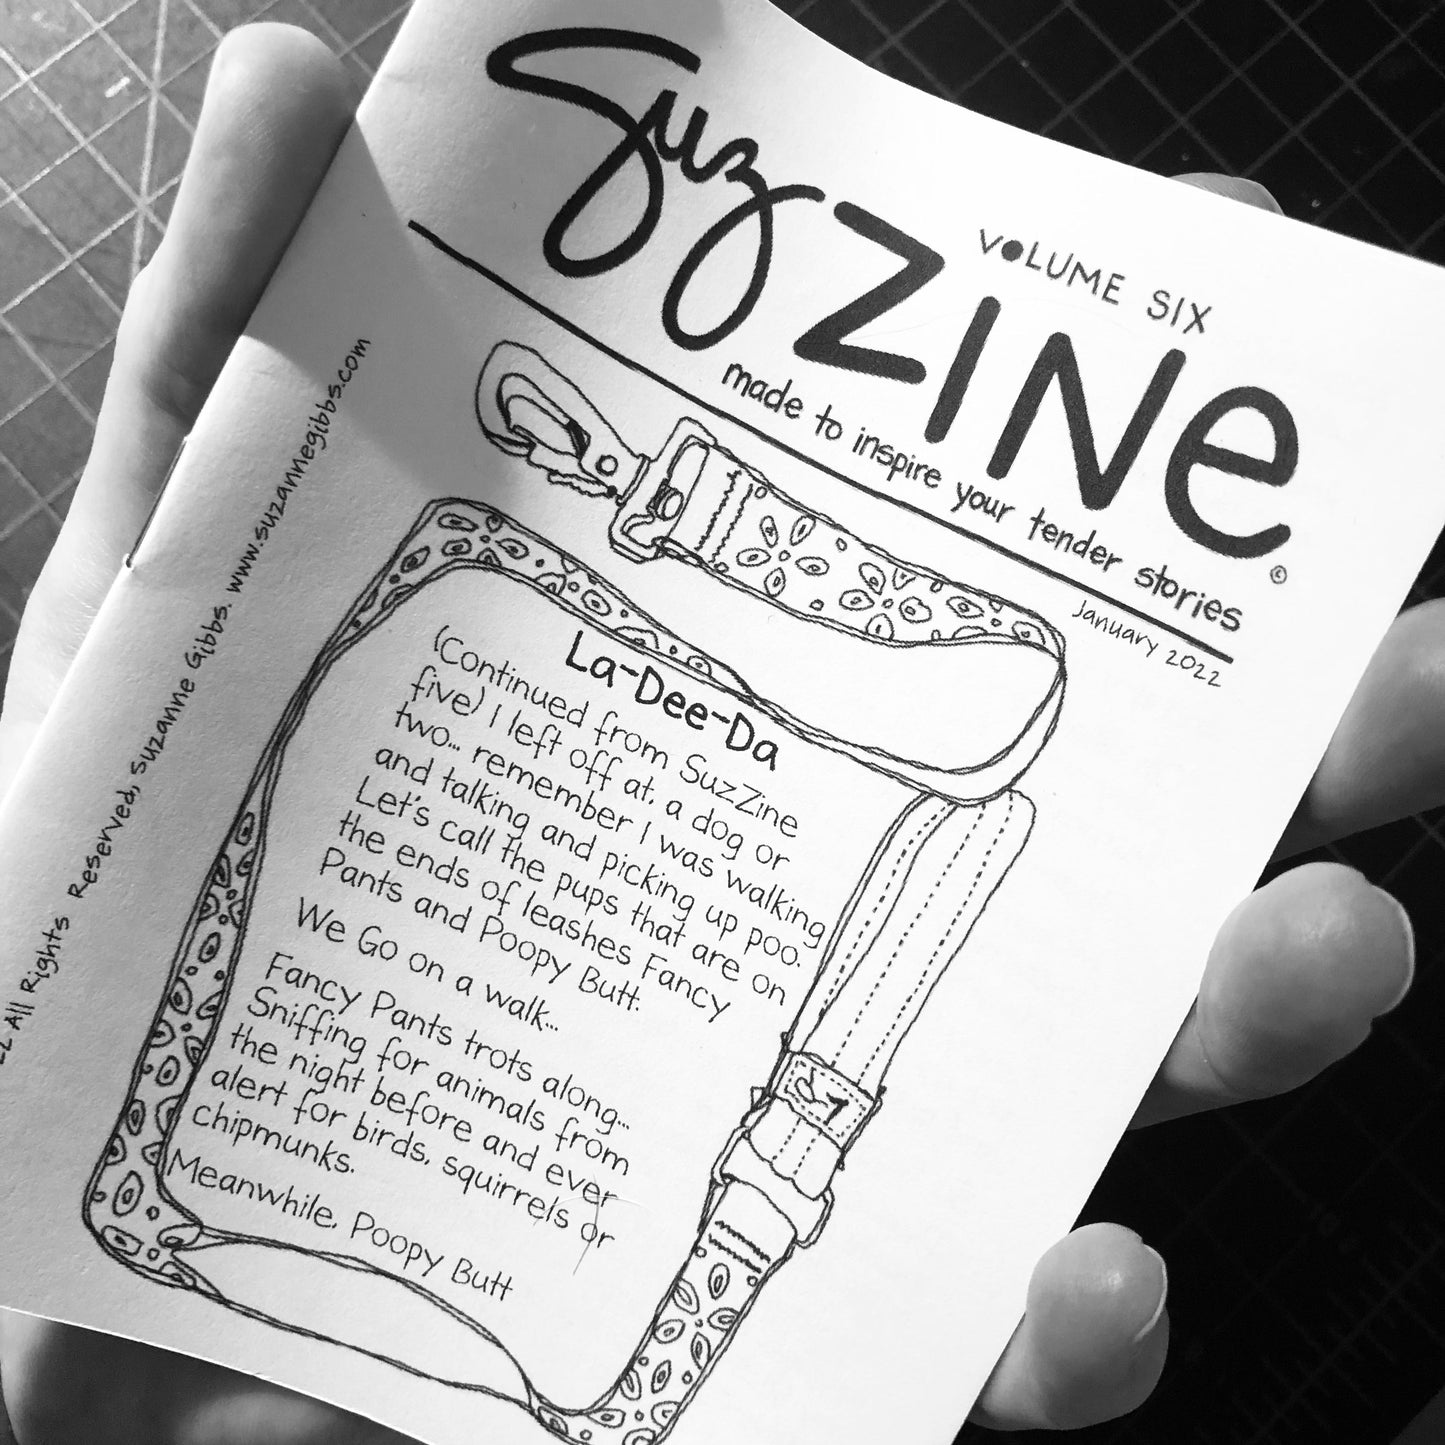 SuzZine | Monthly Publication | Order One Issue